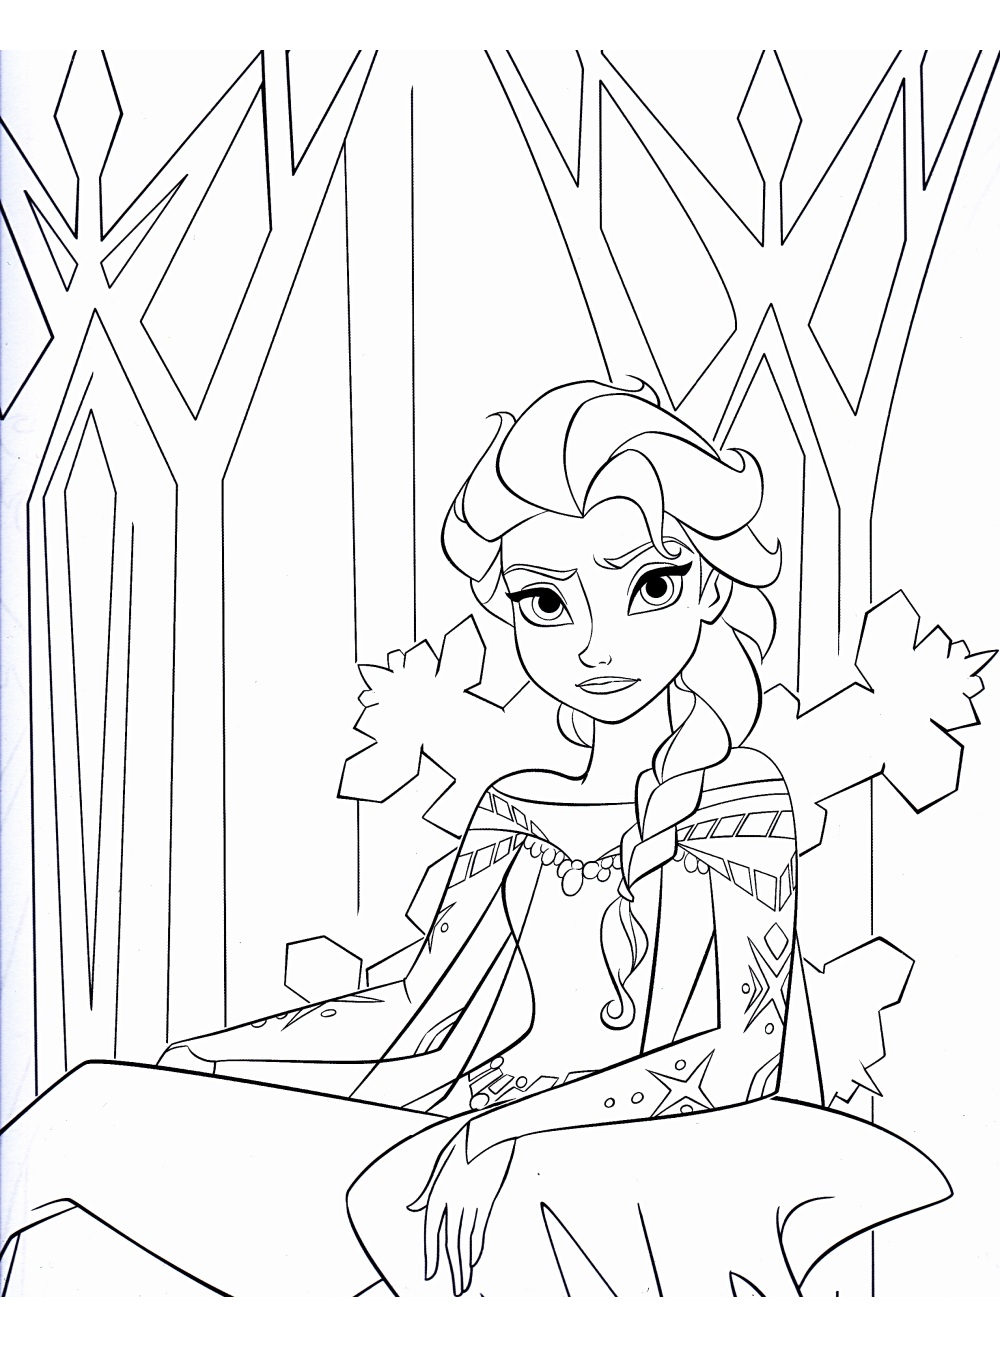 Simple Frozen coloring page for children : Elsa on her throne